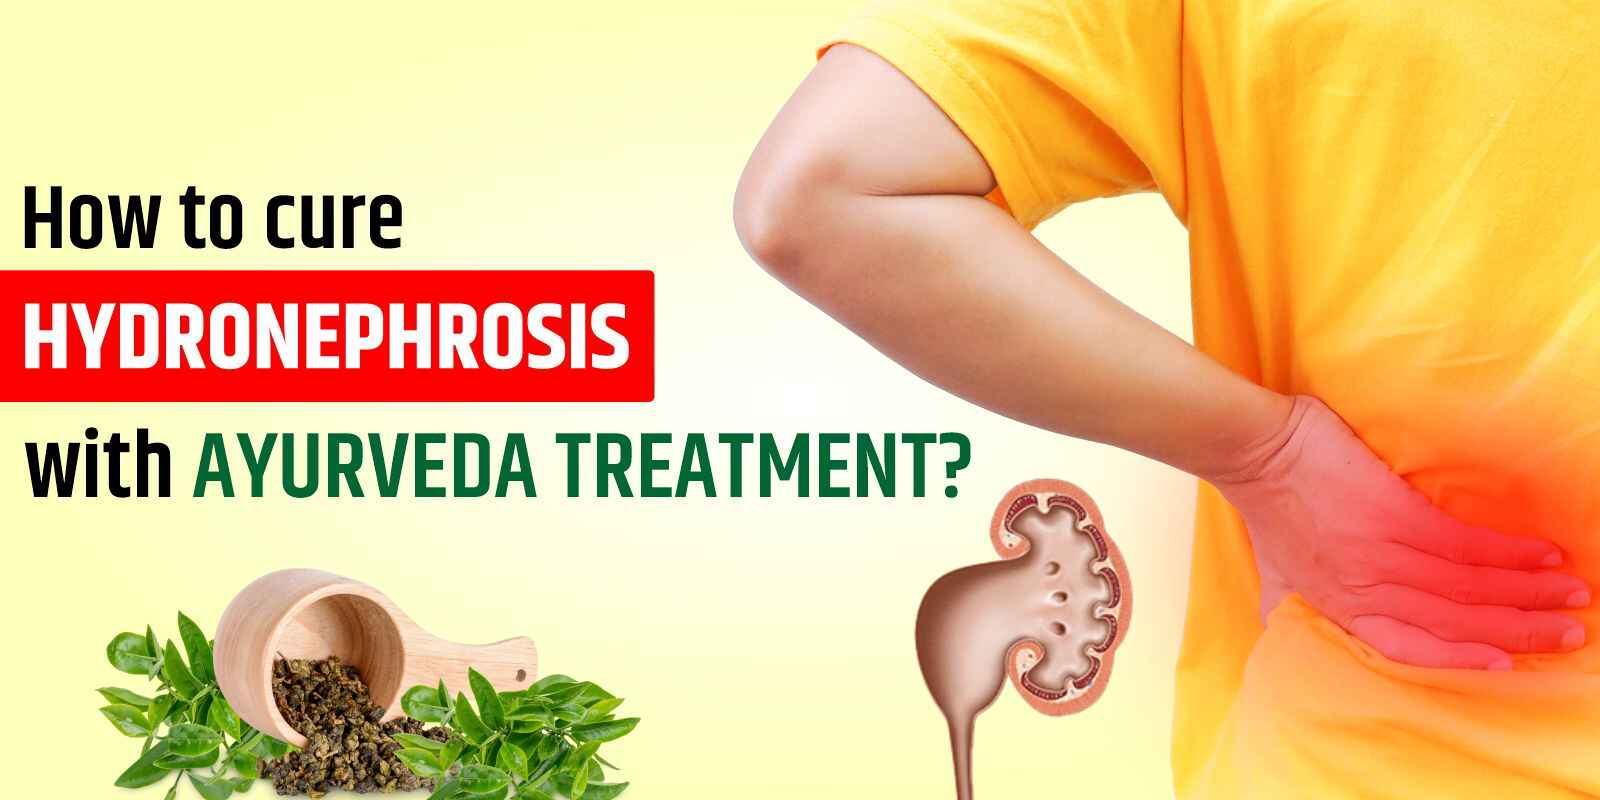 How to cure Hydronephrosis with Ayurveda Treatment?